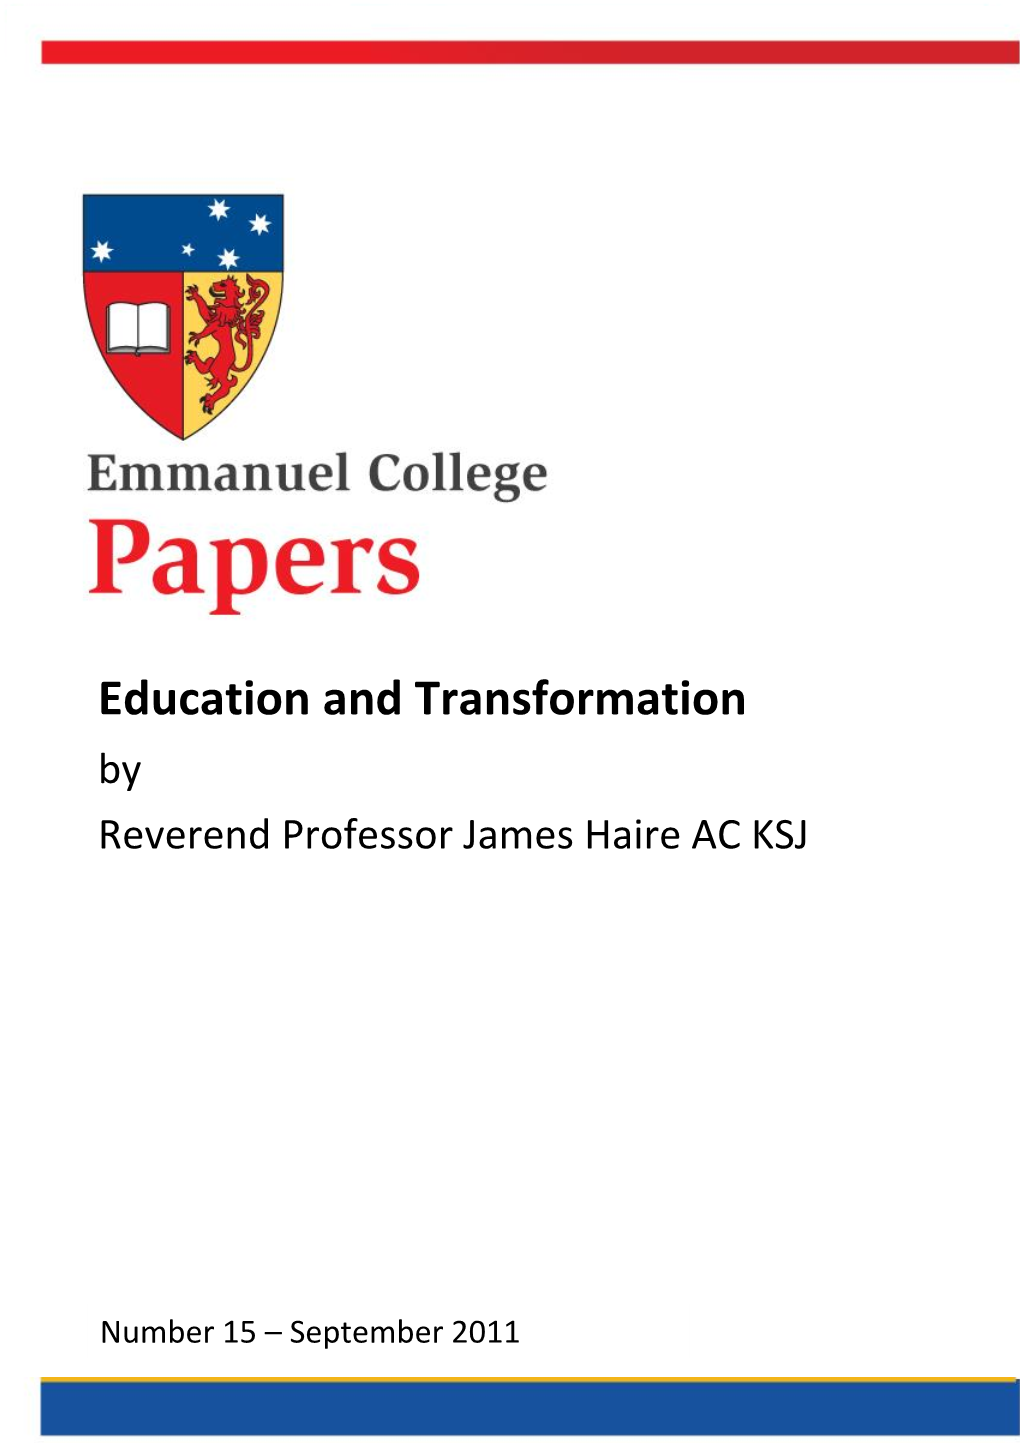 Education and Transformation by Reverend Professor James Haire AC KSJ